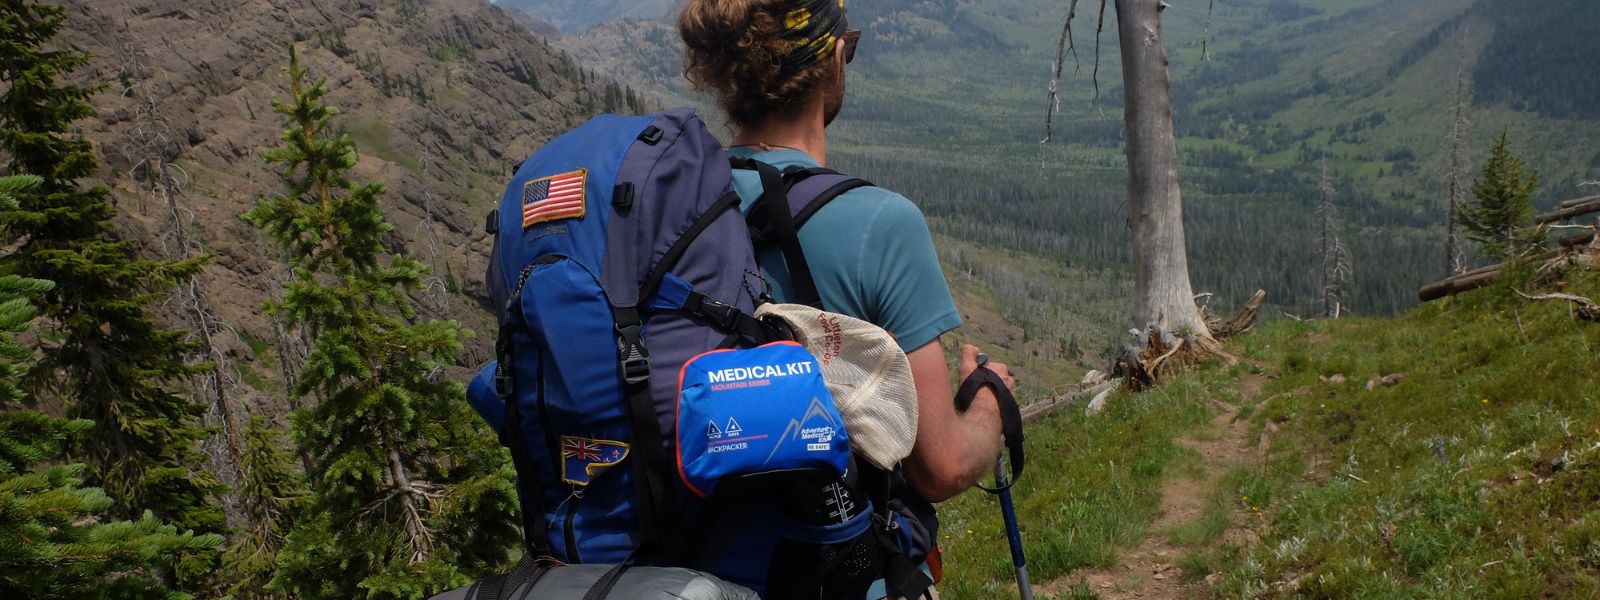 Man with Mountain Series Kit on backpack while hiking